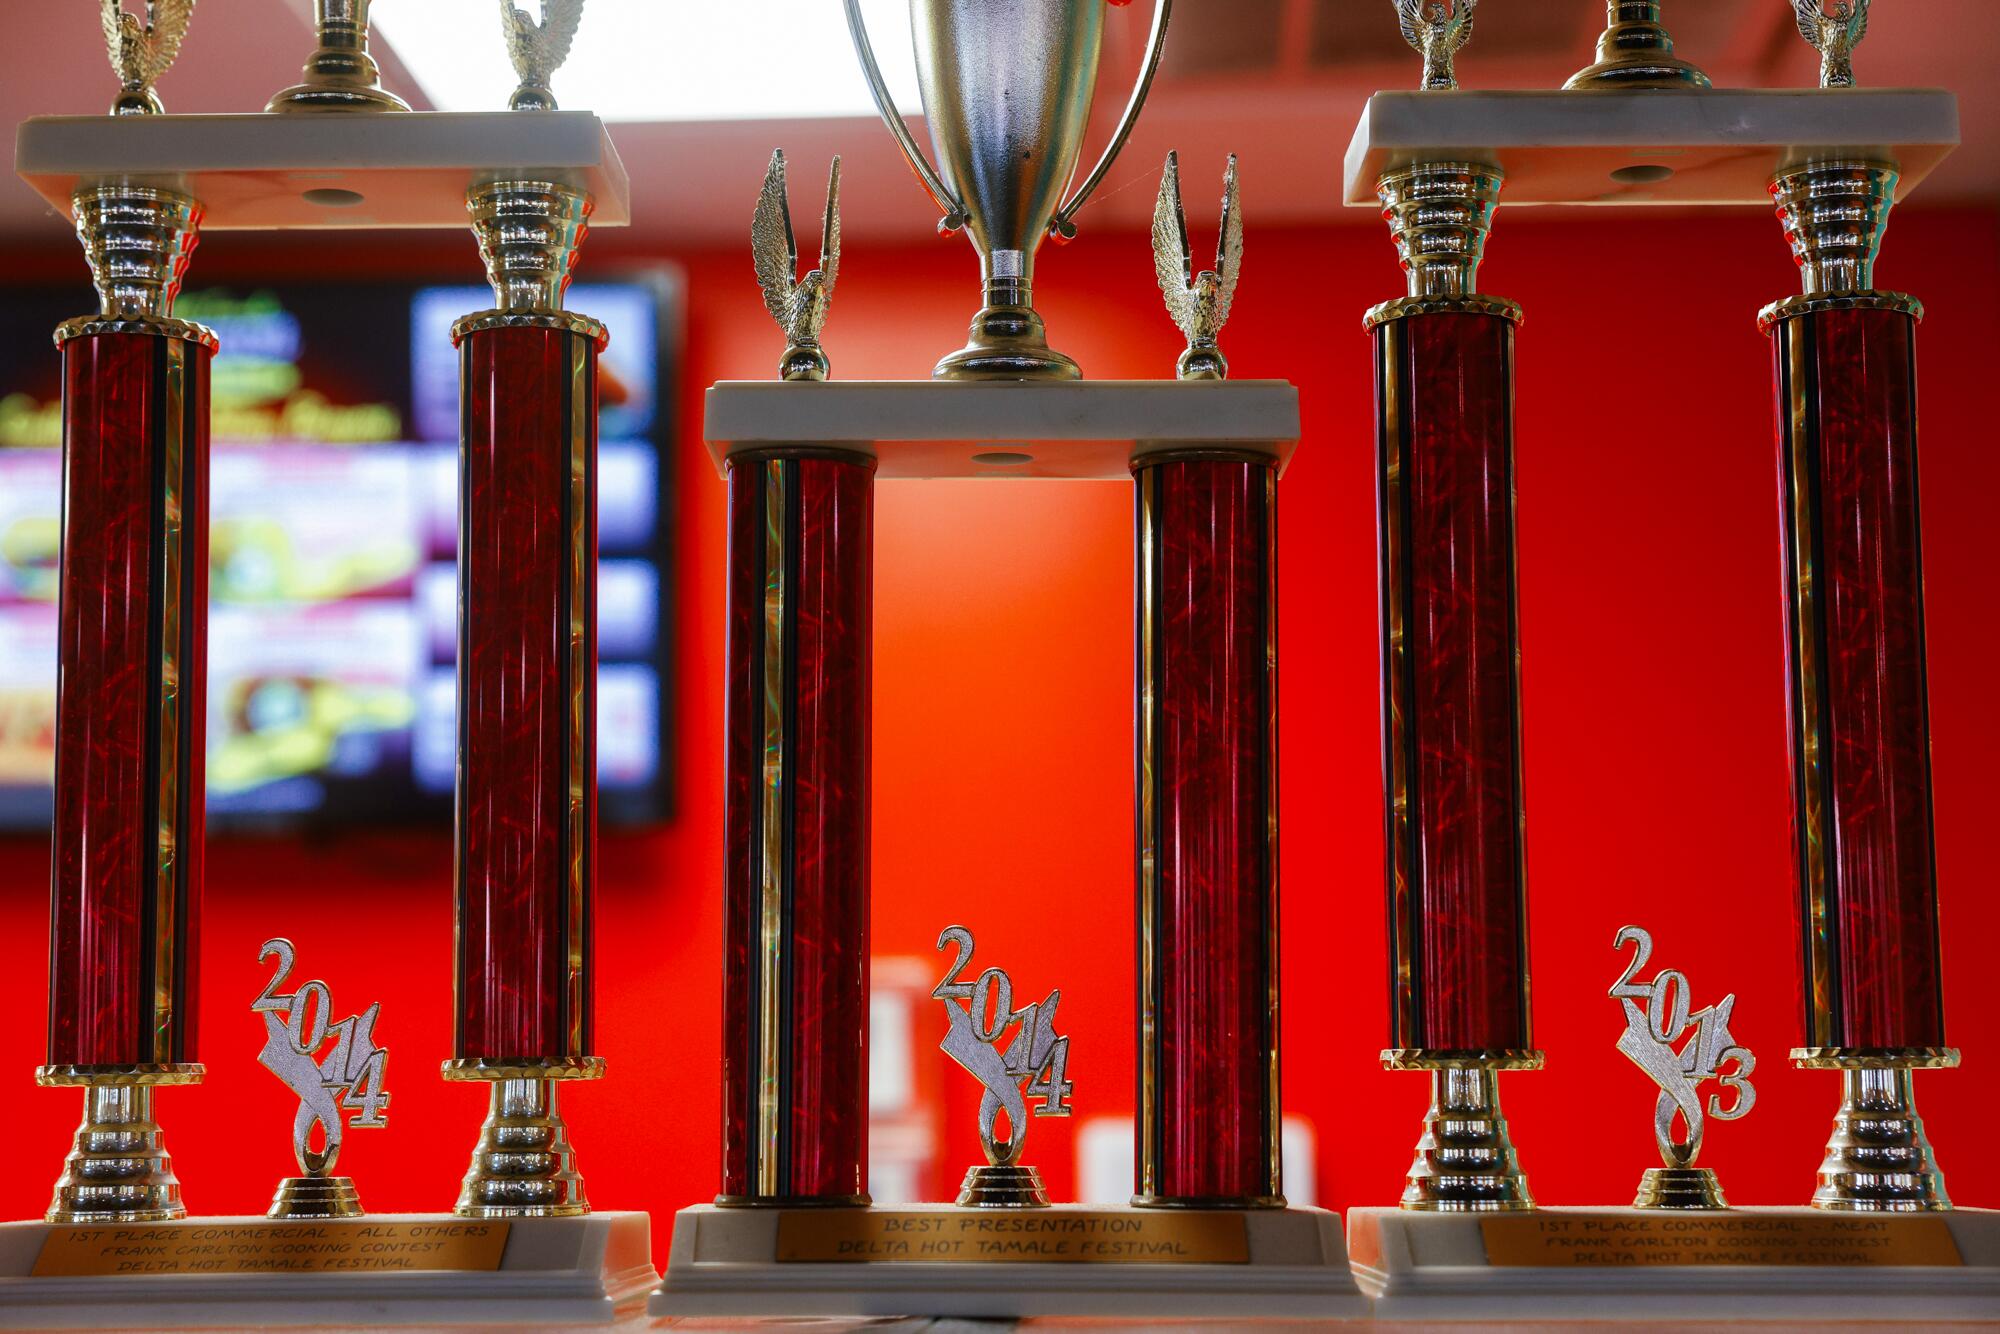 A row of trophies in front of a red wall at a tamale restaurant.